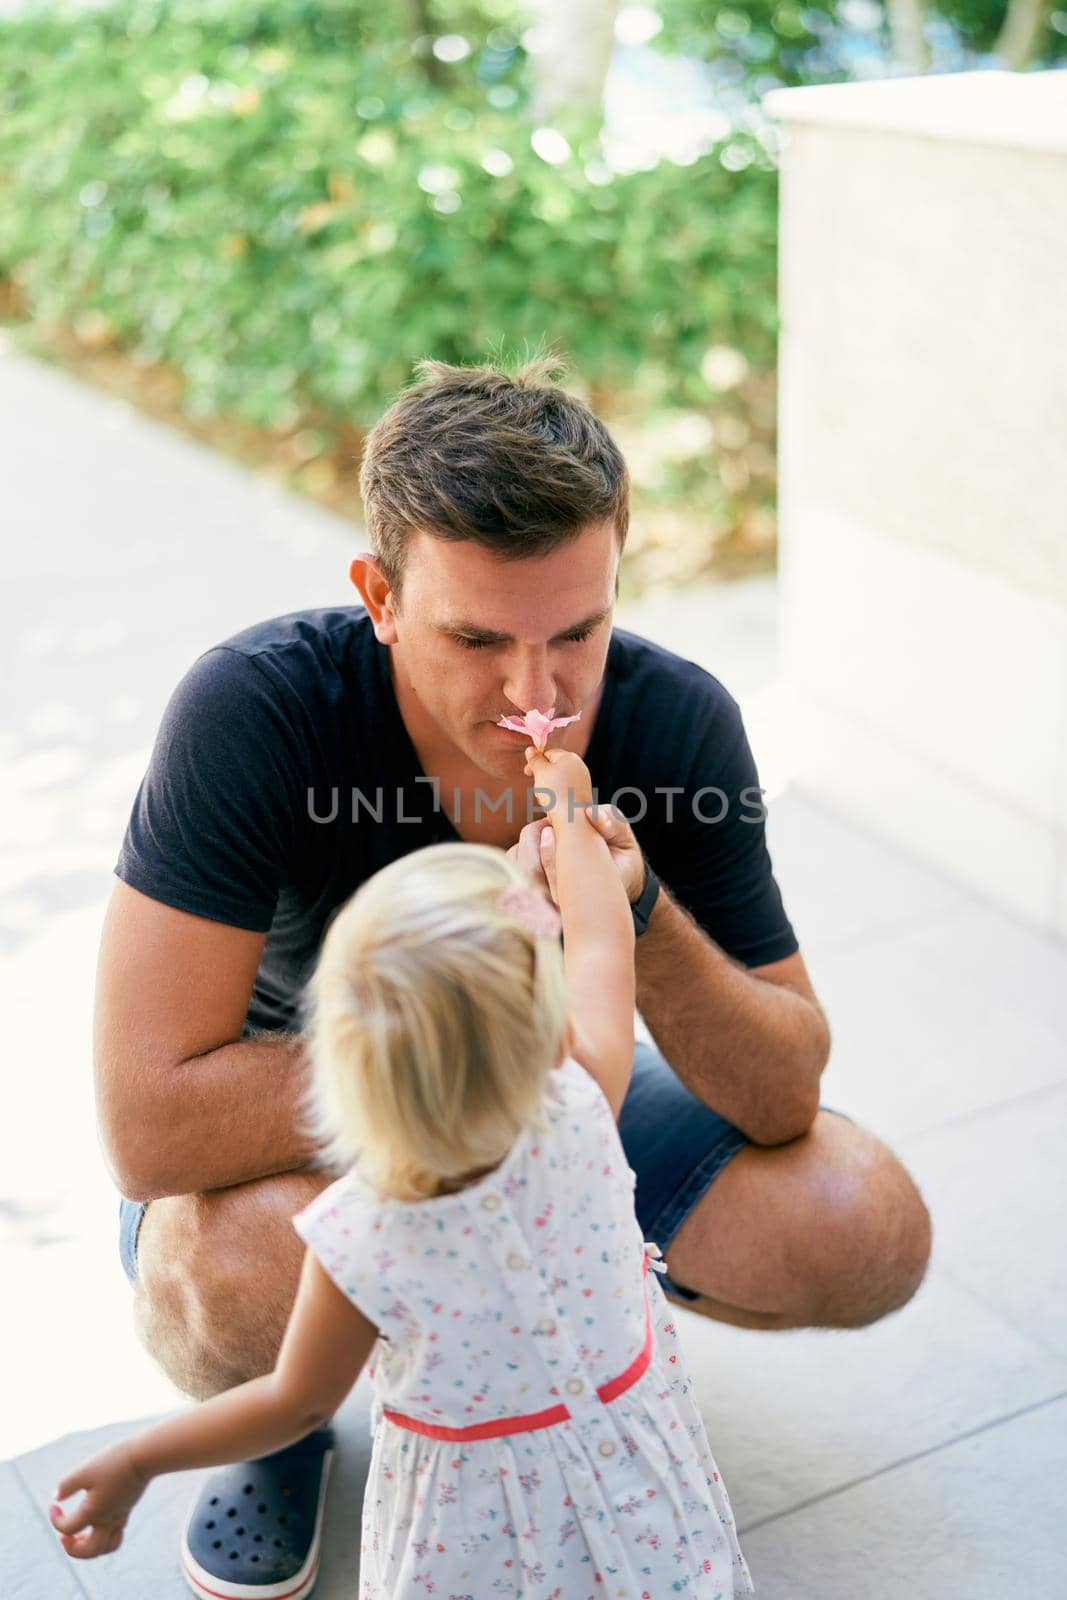 Little girl gives her father a flower by Nadtochiy